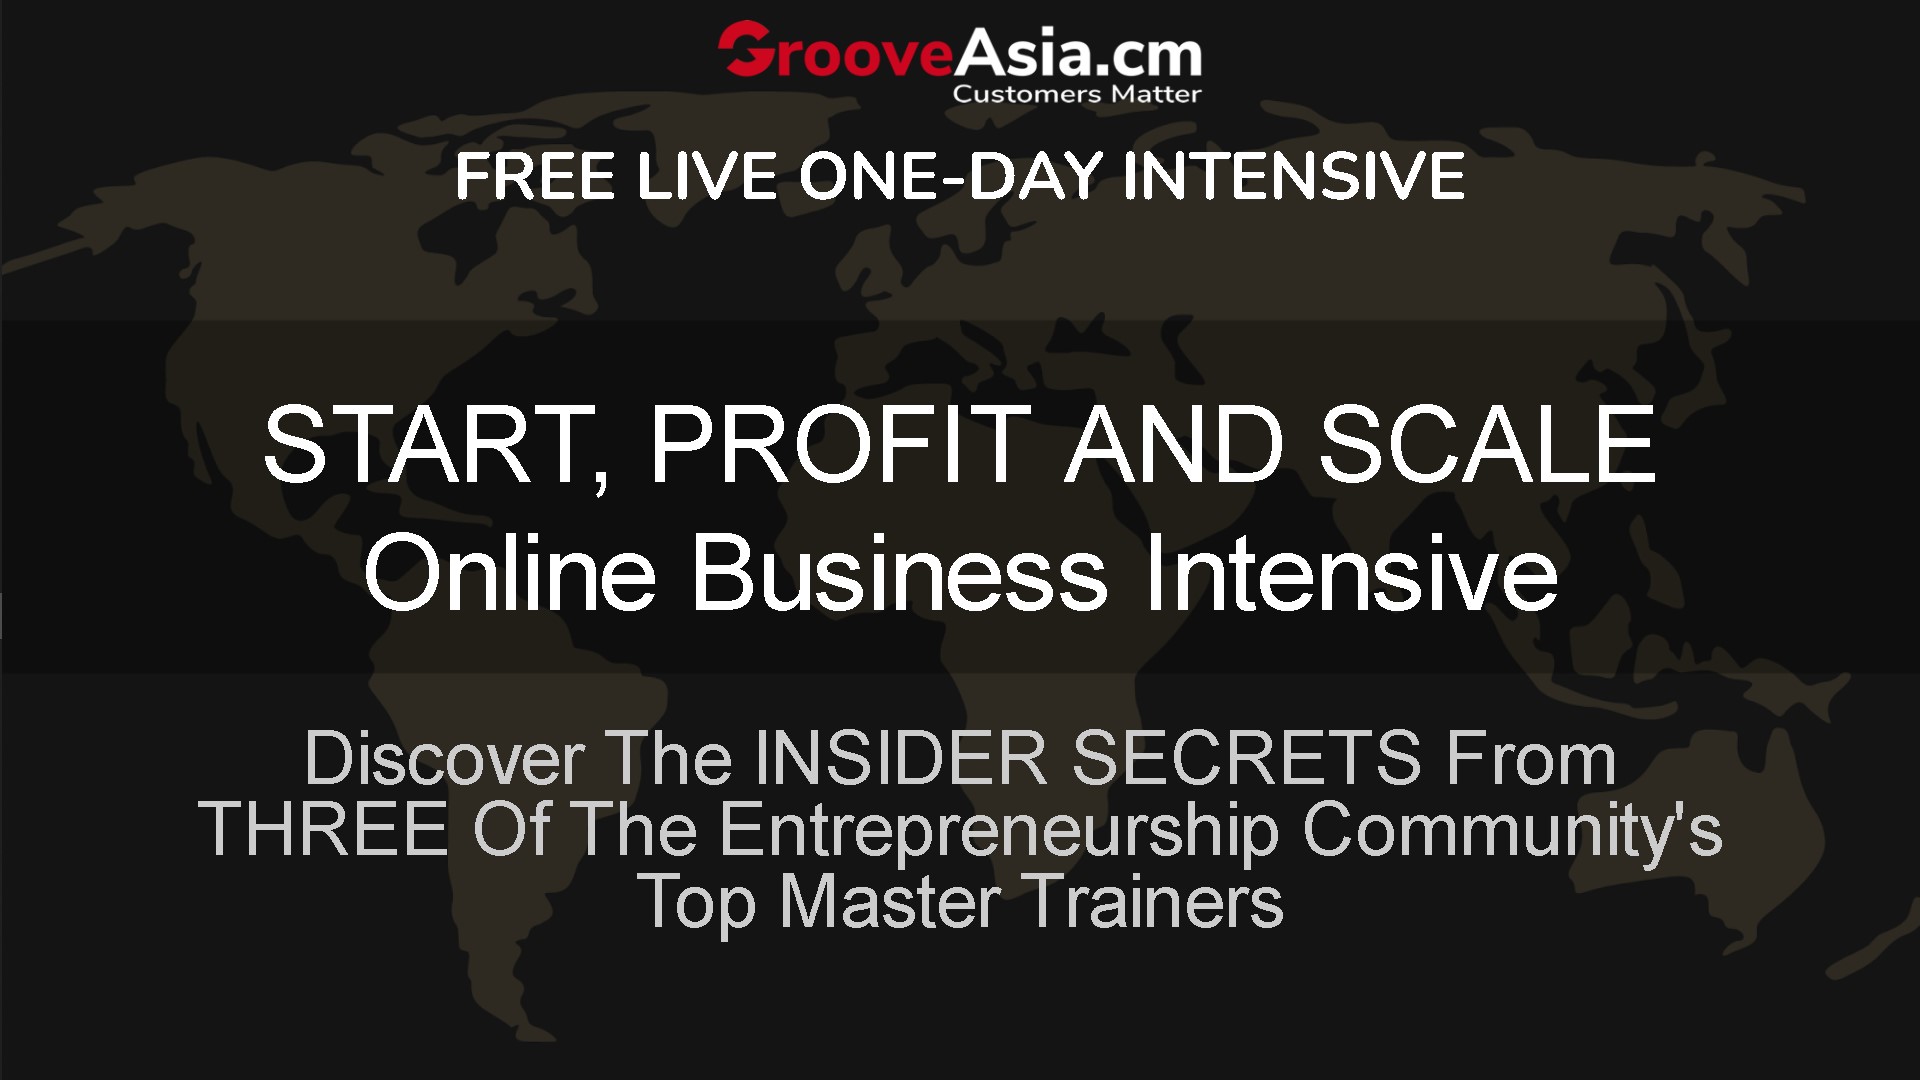 simon leung grooveasia free live one day intensive